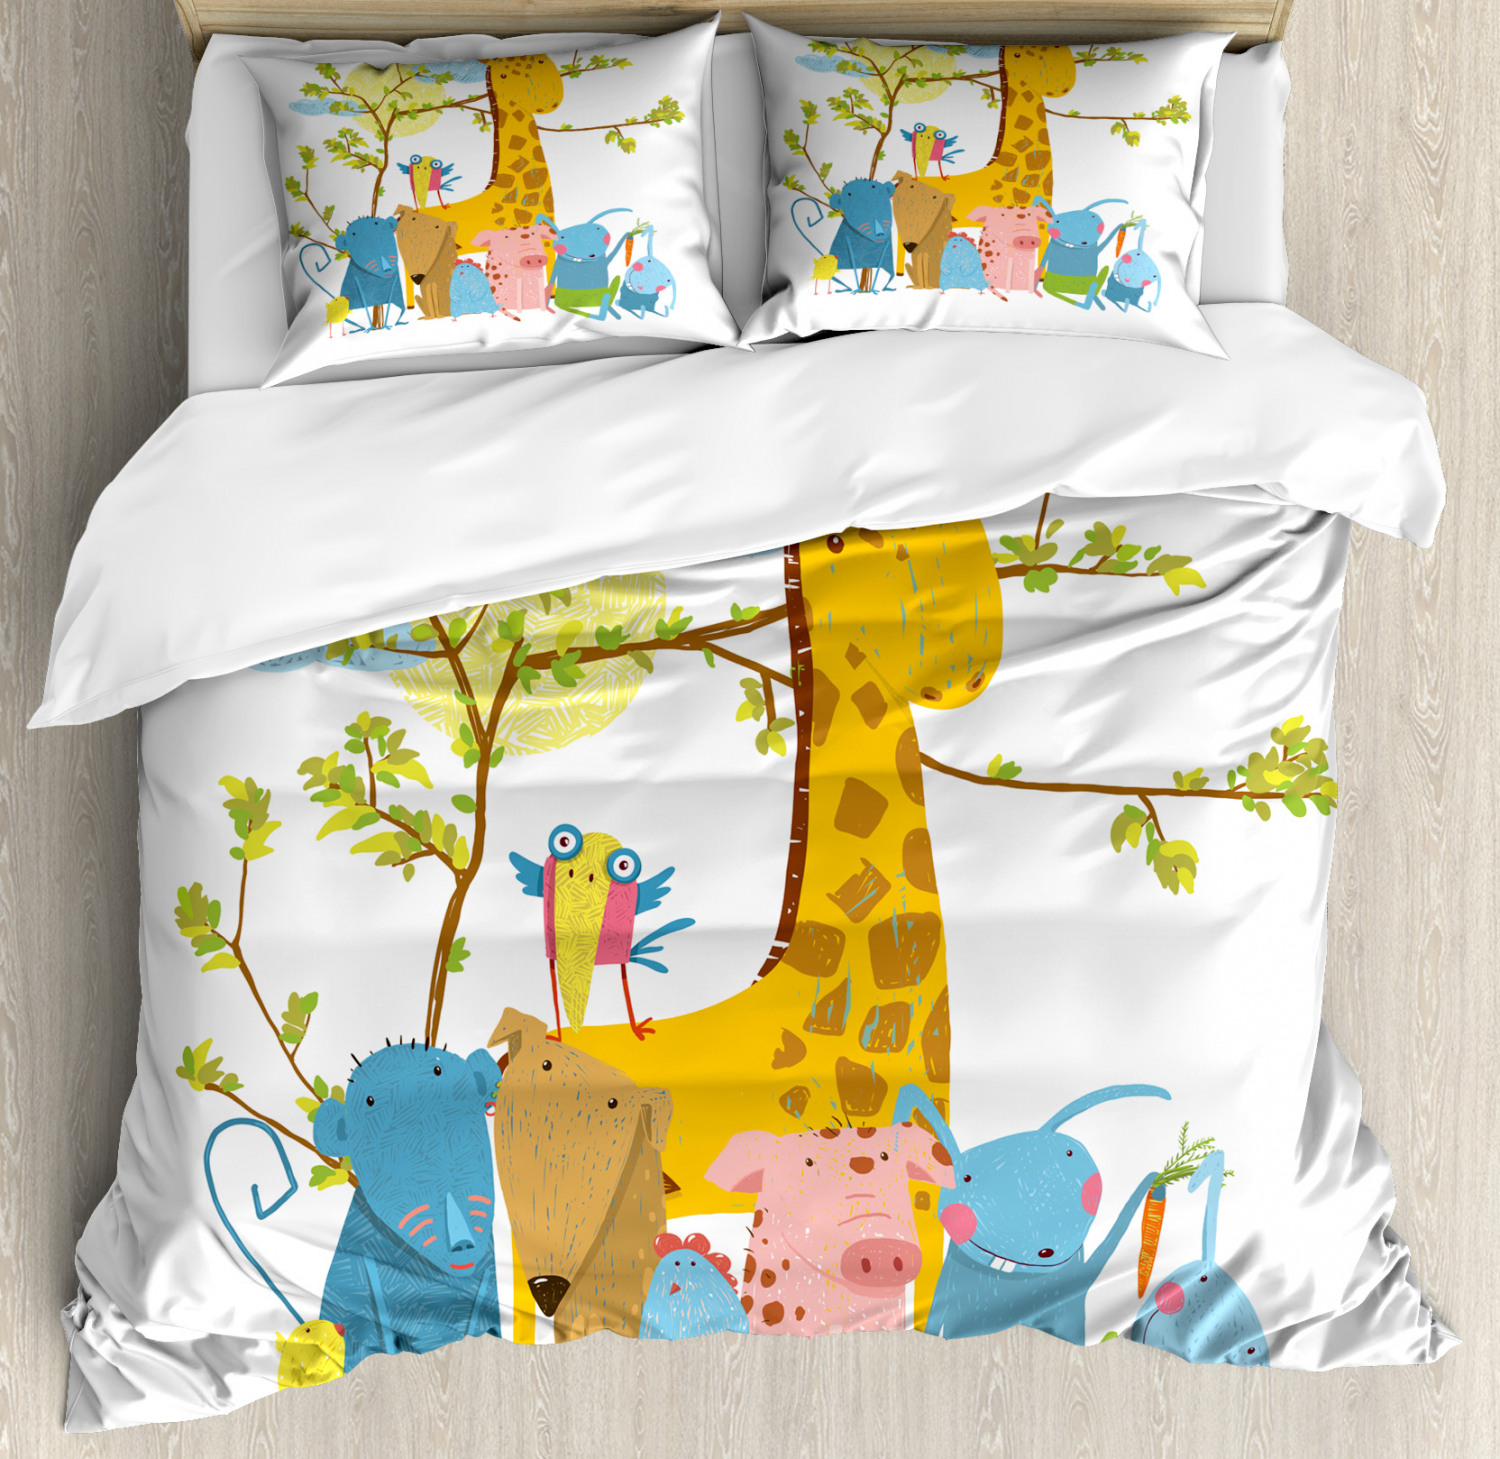 Kids Boys Queen Size Duvet Cover Set, Zoo Animals Sitting under a Tree Cartoon Style Giraffe Pig Bunny Monkey and Hen, Decorative 3 Piece Bedding Set with 2 Pillow Shams, Multicolor, by Ambesonne - image 1 of 3